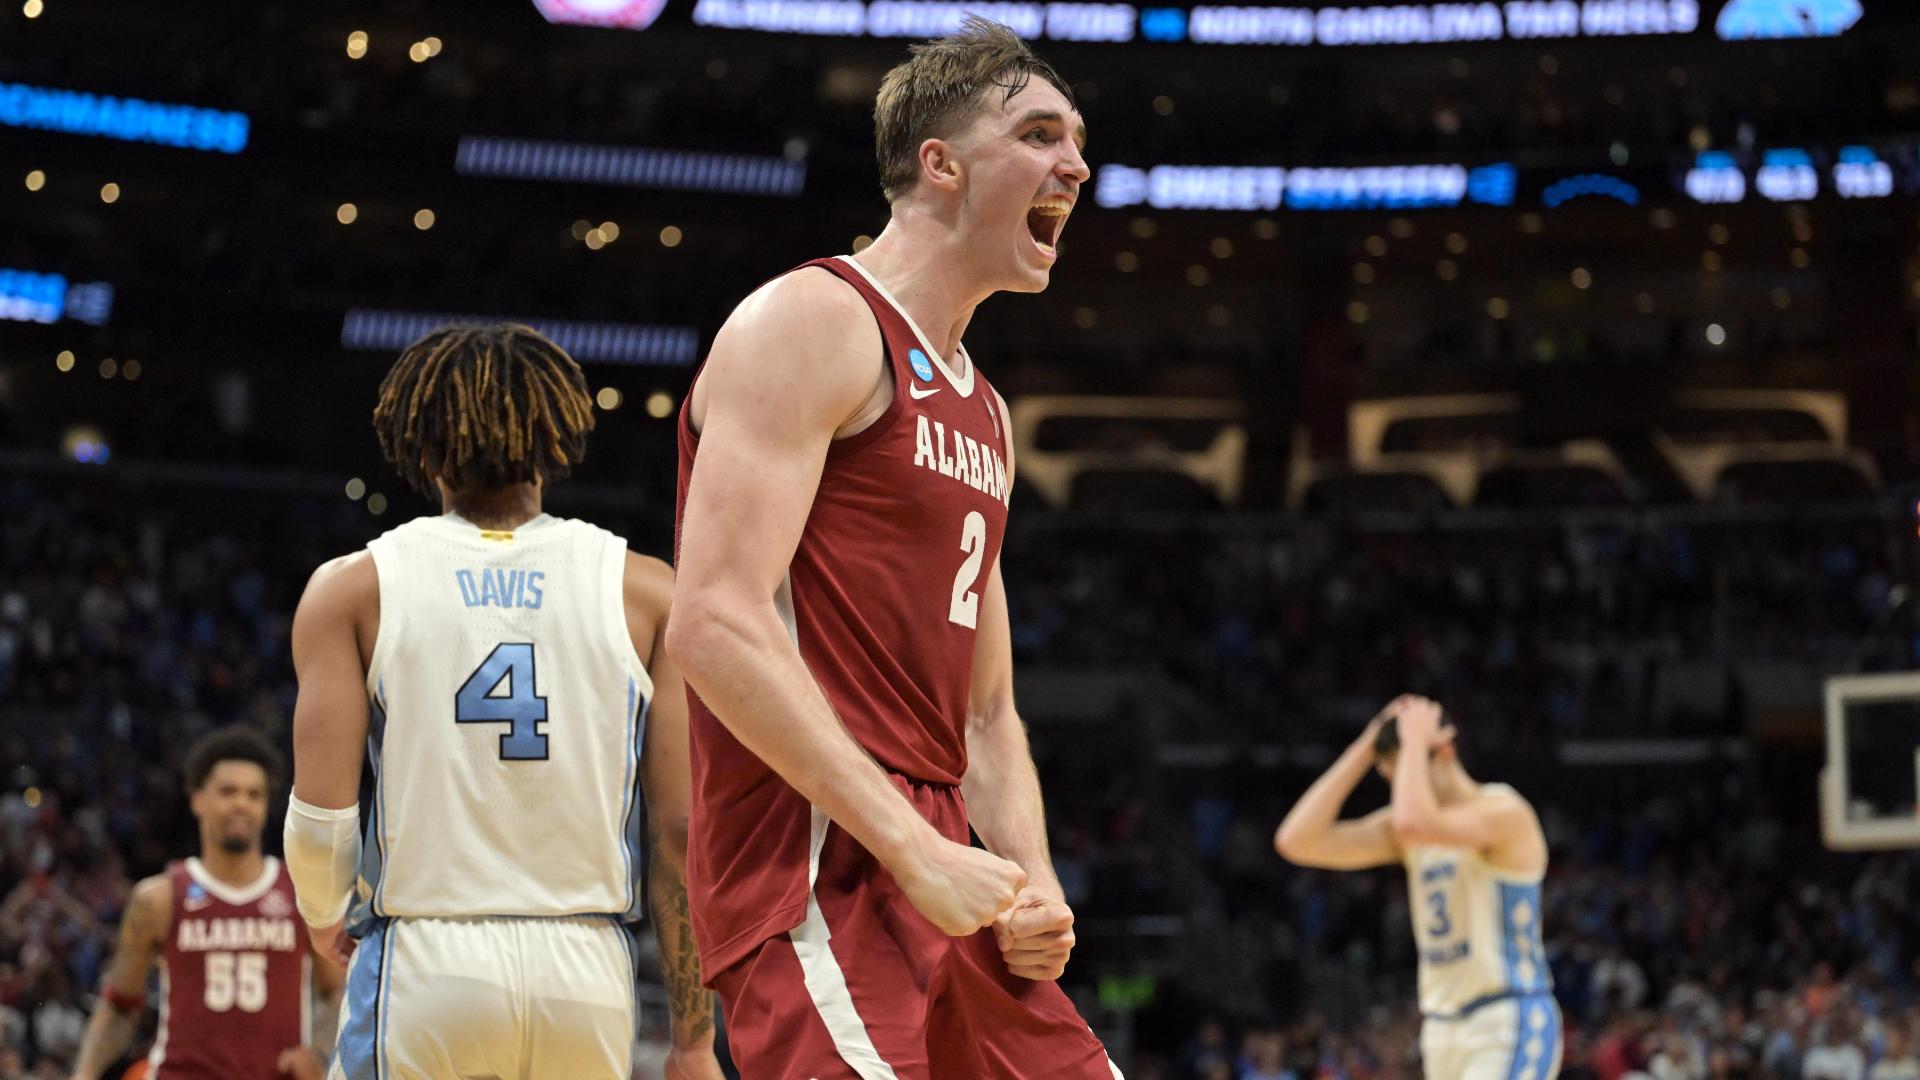 Grant Nelson's big and-1 puts Bama up in final minute